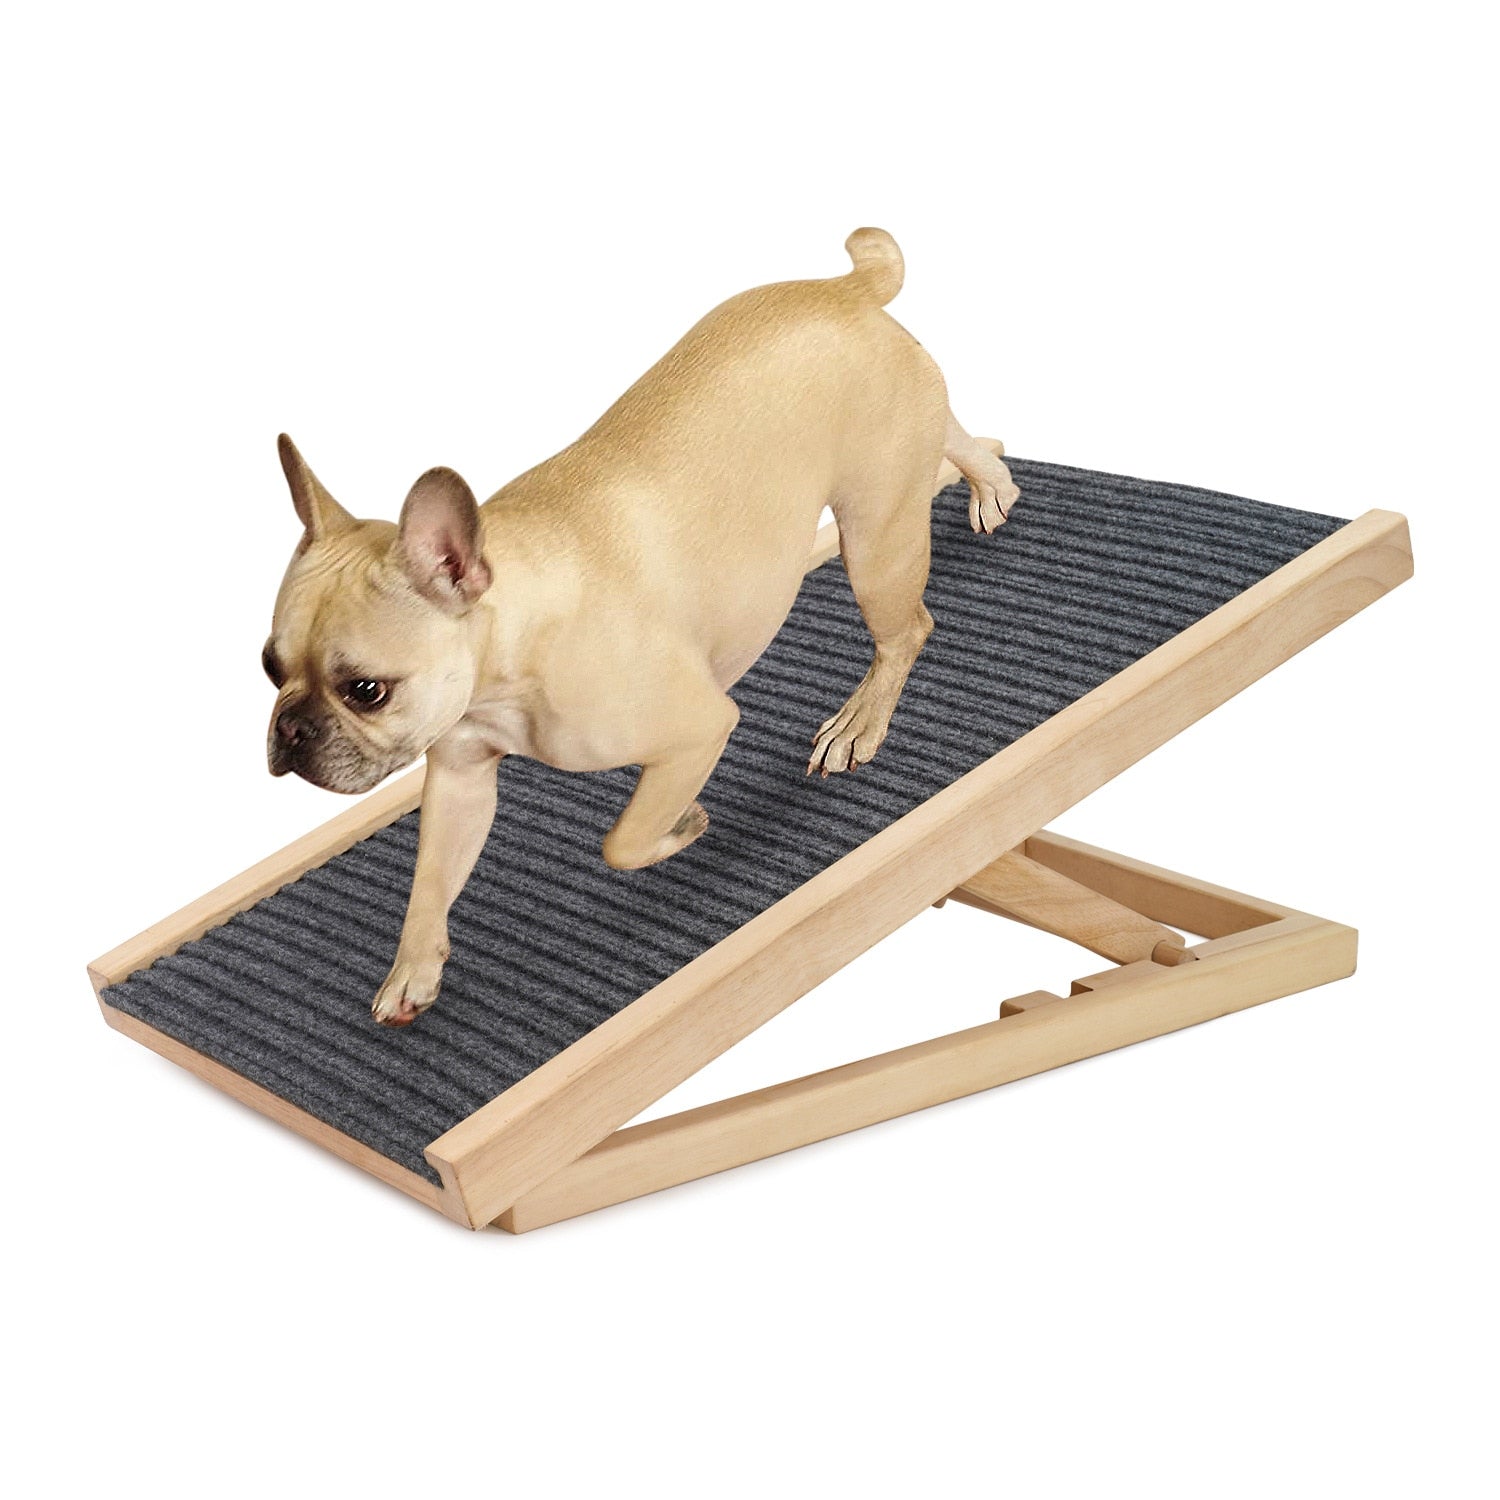 A sturdy pet ramp with a textured surface, providing secure traction for dogs of all sizes. Perfect for easy access to cars or furniture.